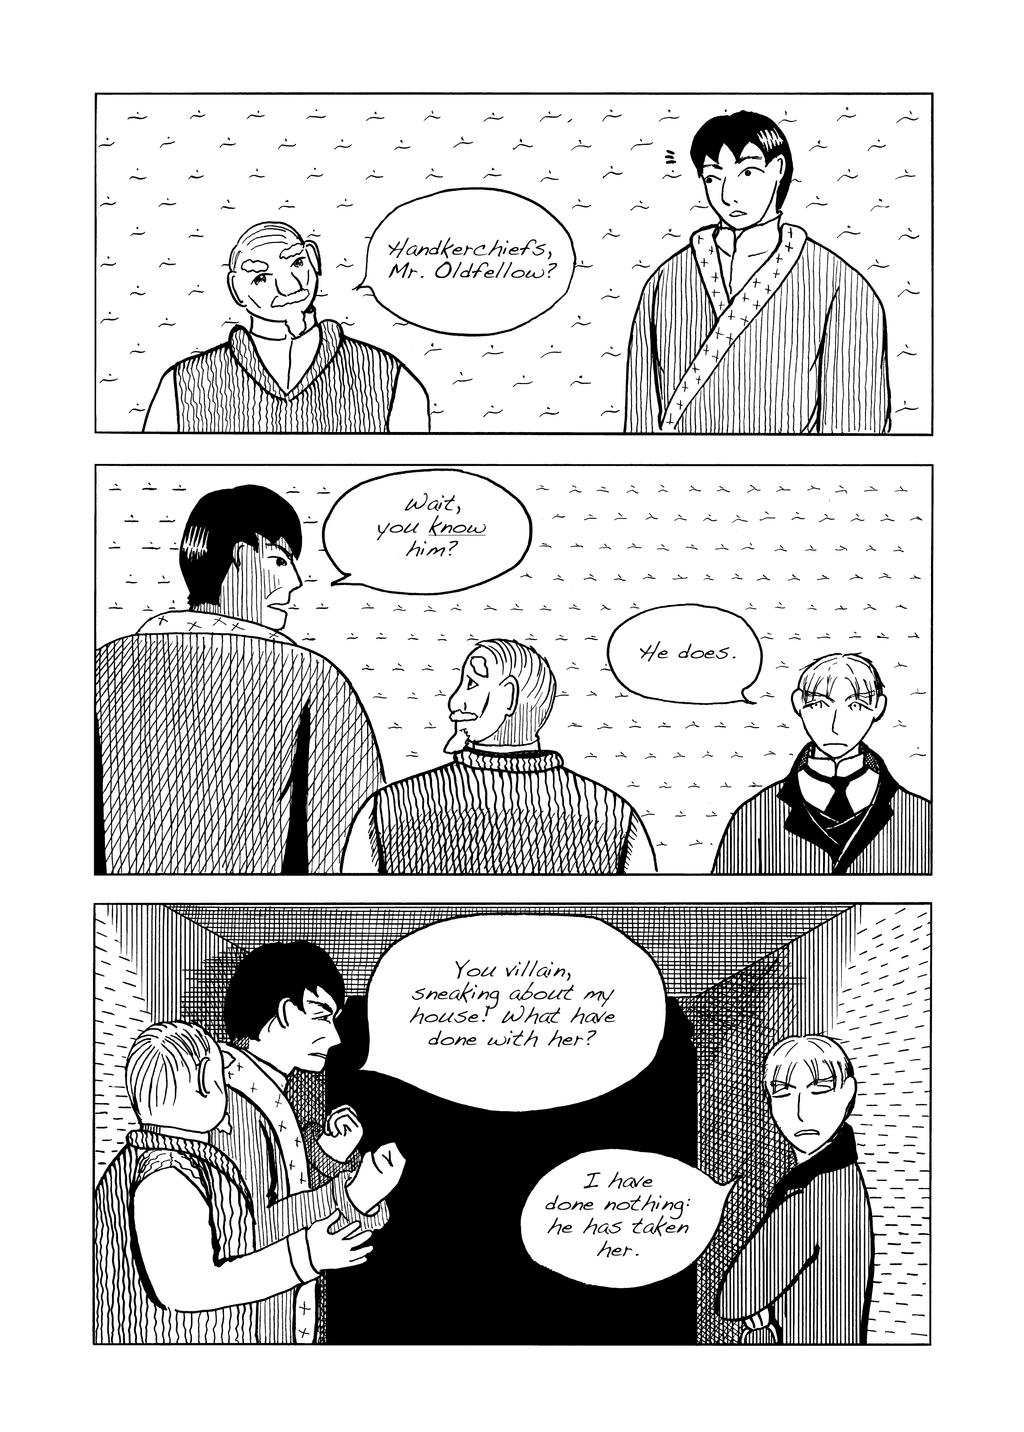 Chapter 3 Page 18 of Concerning Rosamond Grey